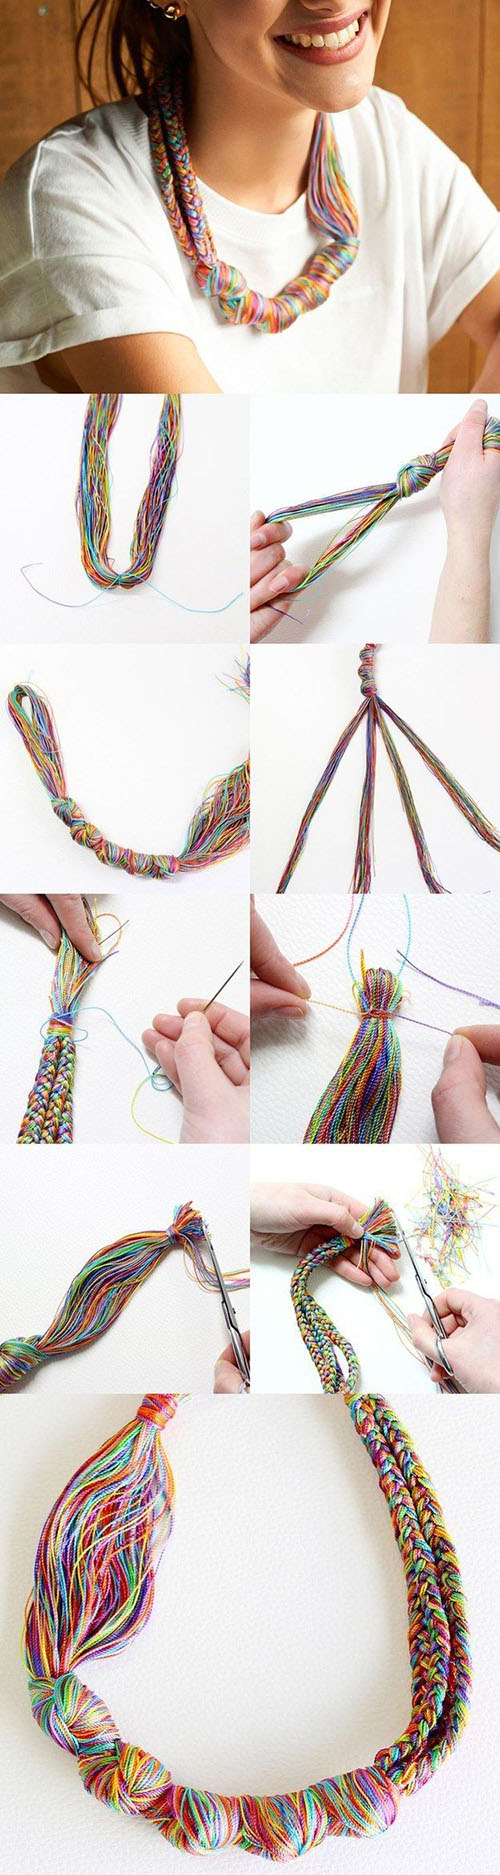 11 Embroidery Thread Necklace25